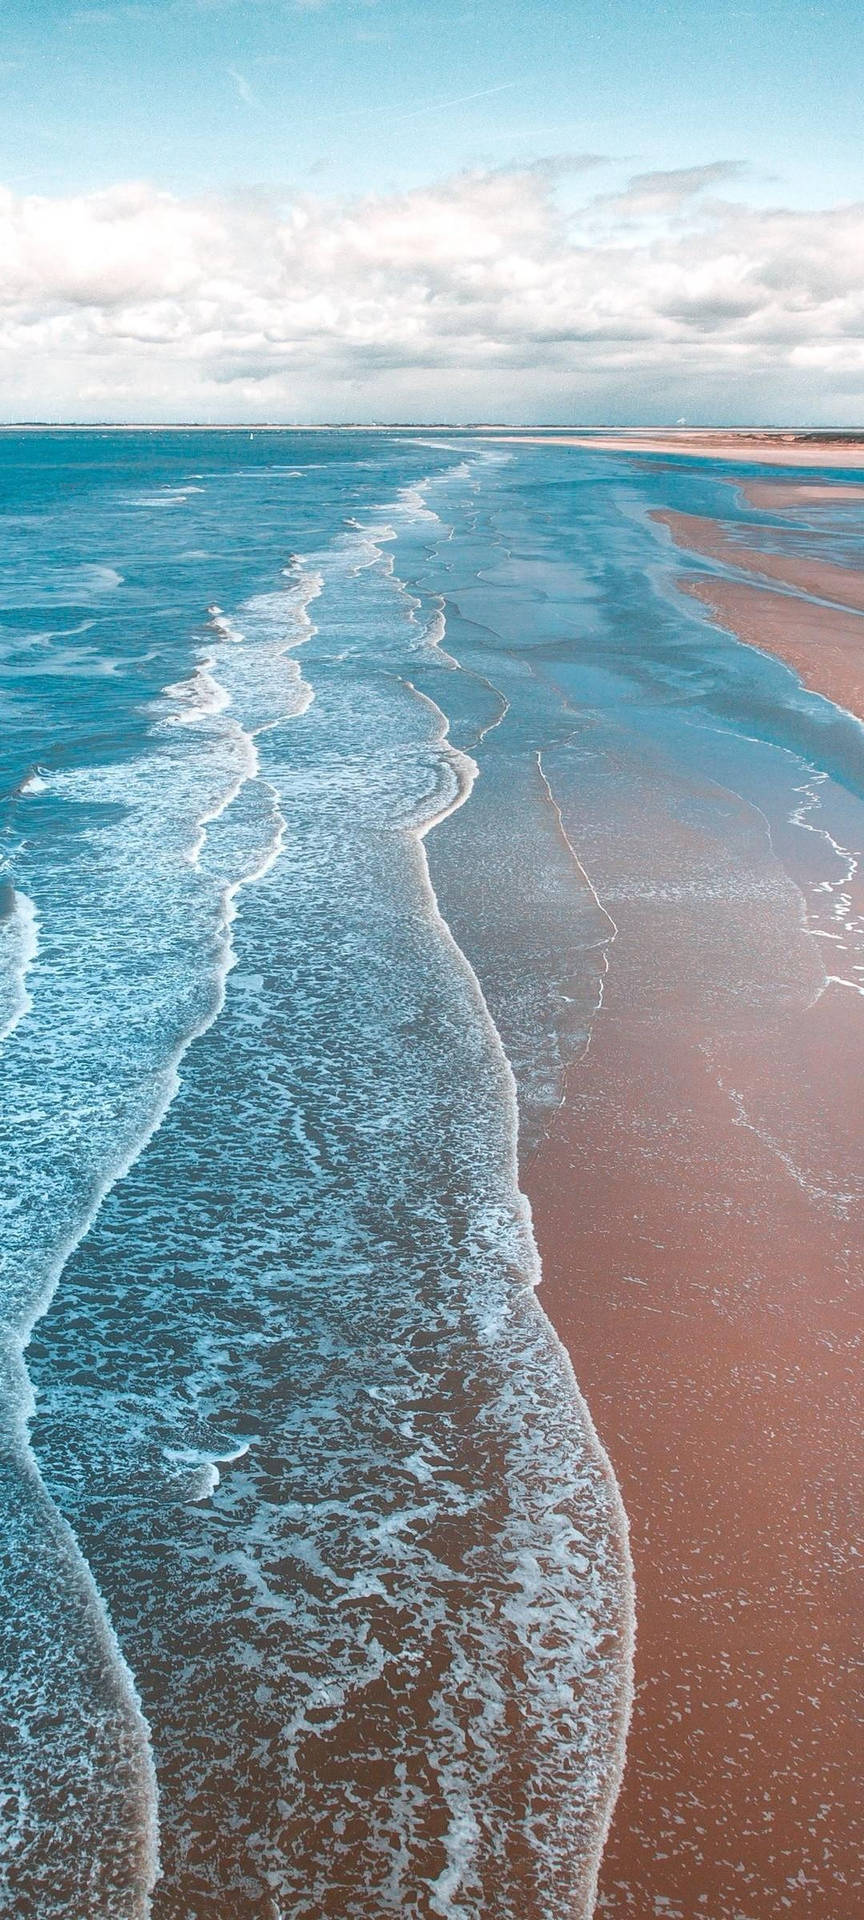 Redmi Note 10 Overlapping Beach Waves Wallpaper